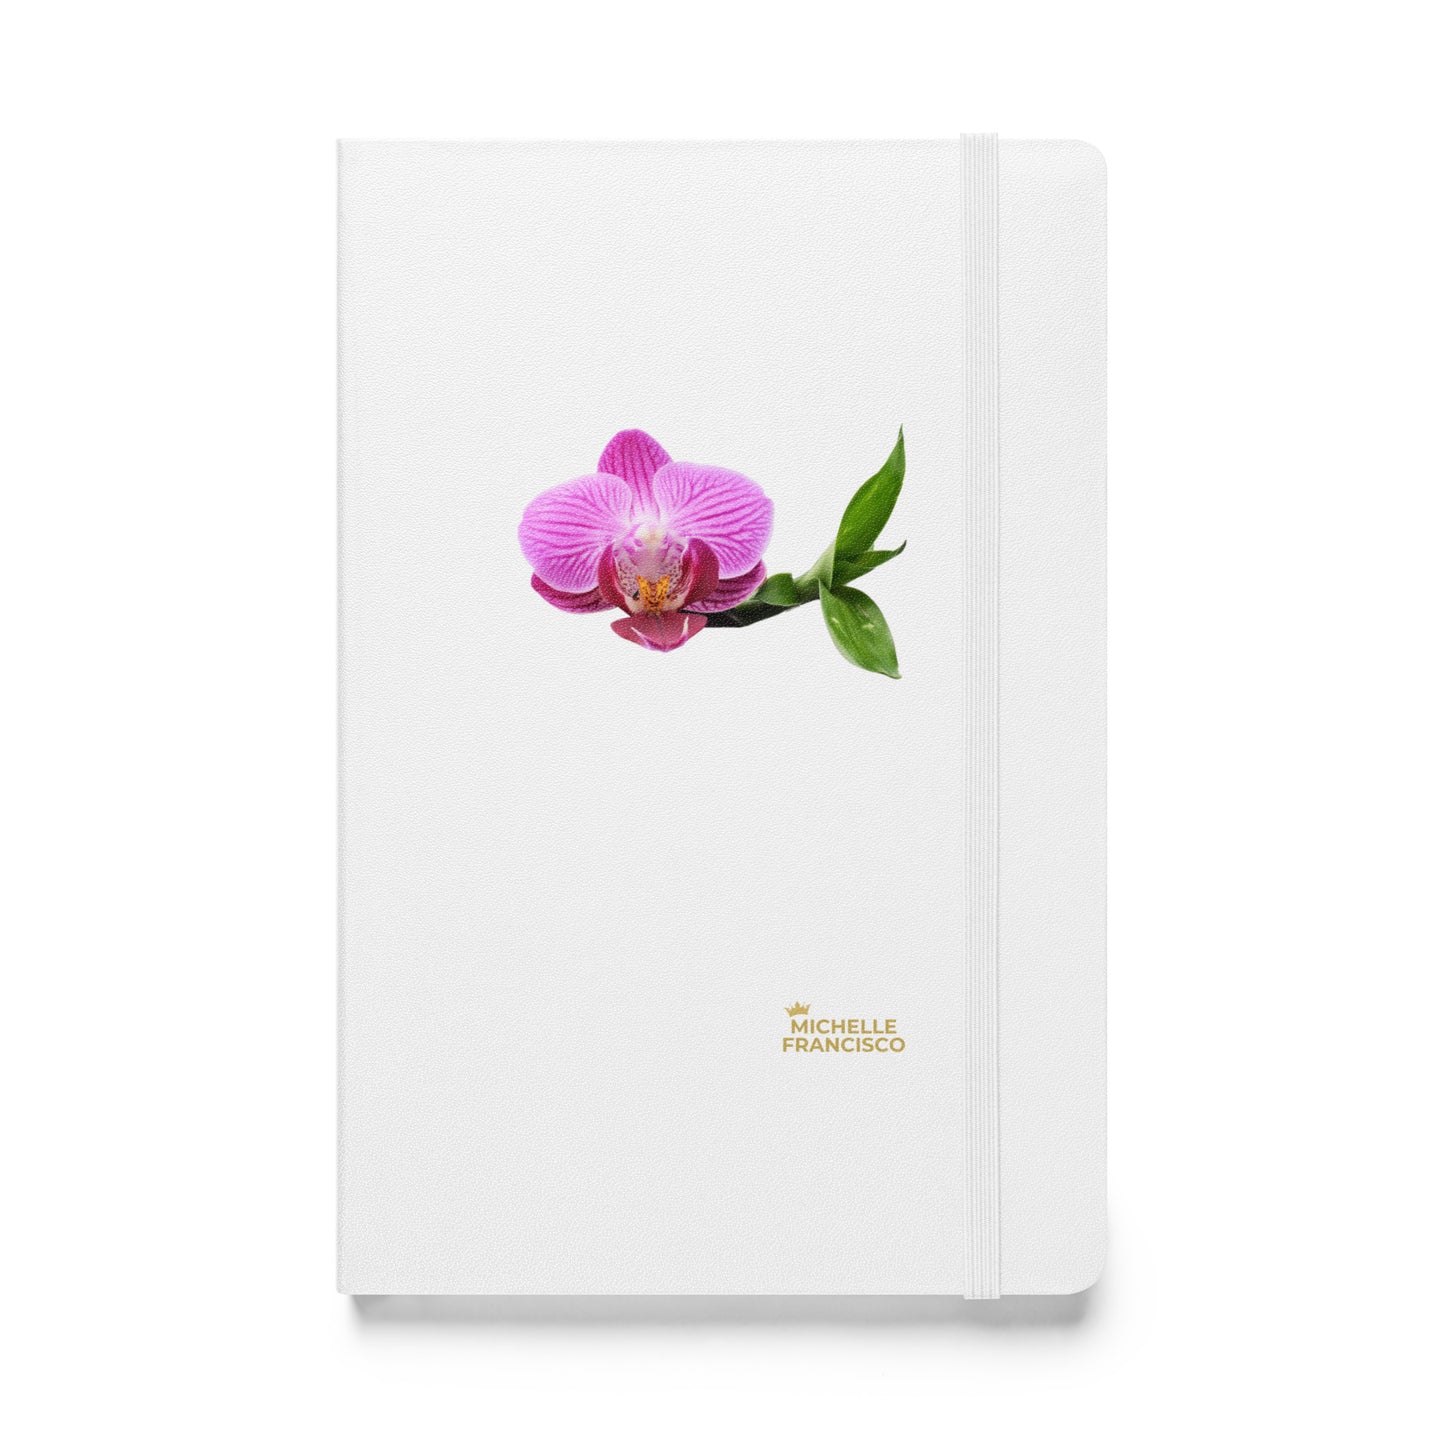 Pink Orchid Hardcover Bound Notebook